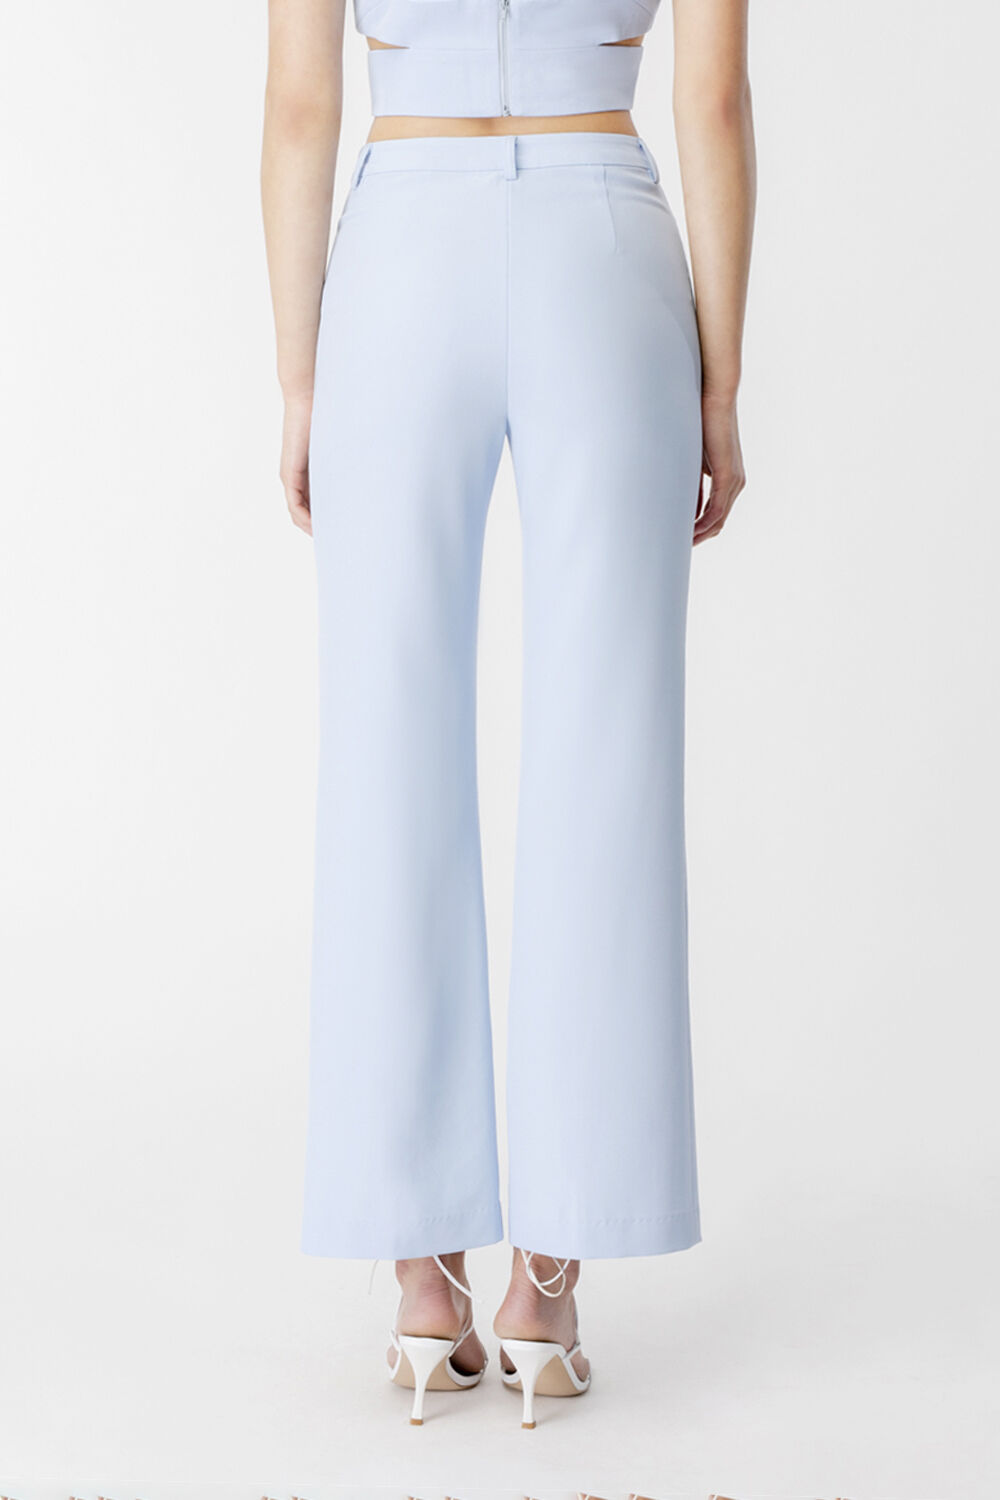 NORTH HIGH RISE PANT in colour MOONLIGHT BLUE